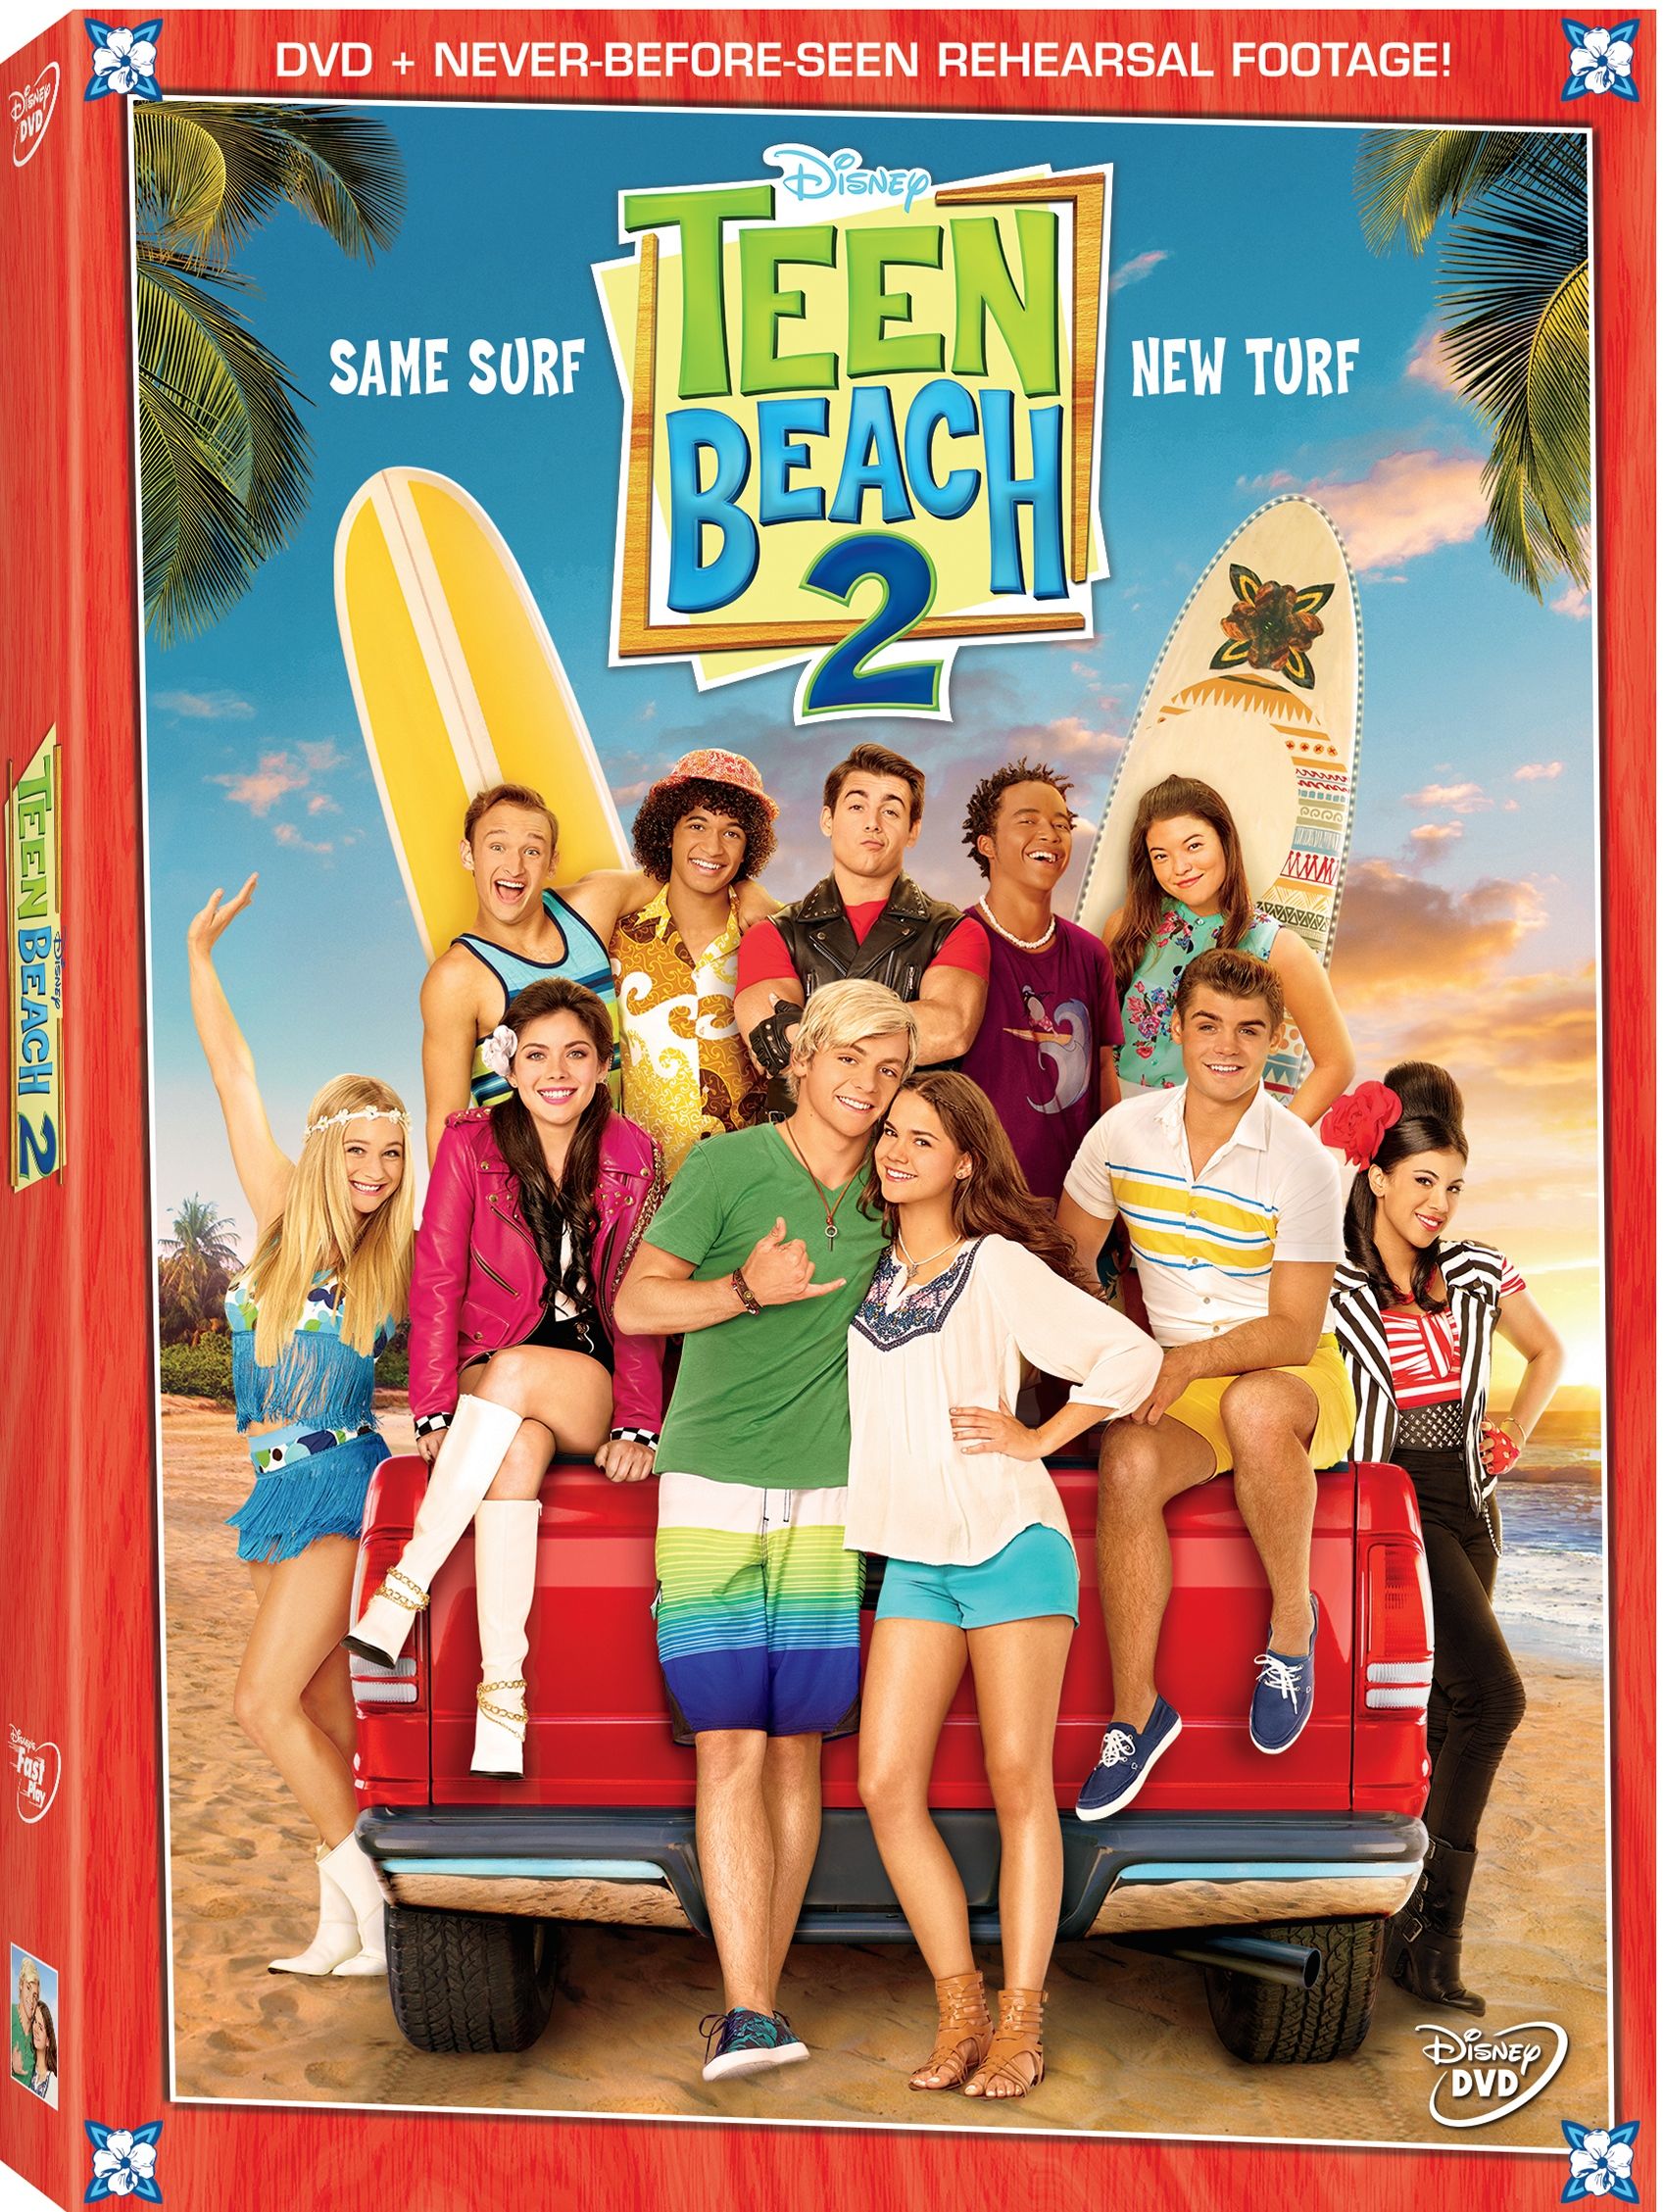 Teen Beach 2 Comes to DVD and Blu-ray June 26th!